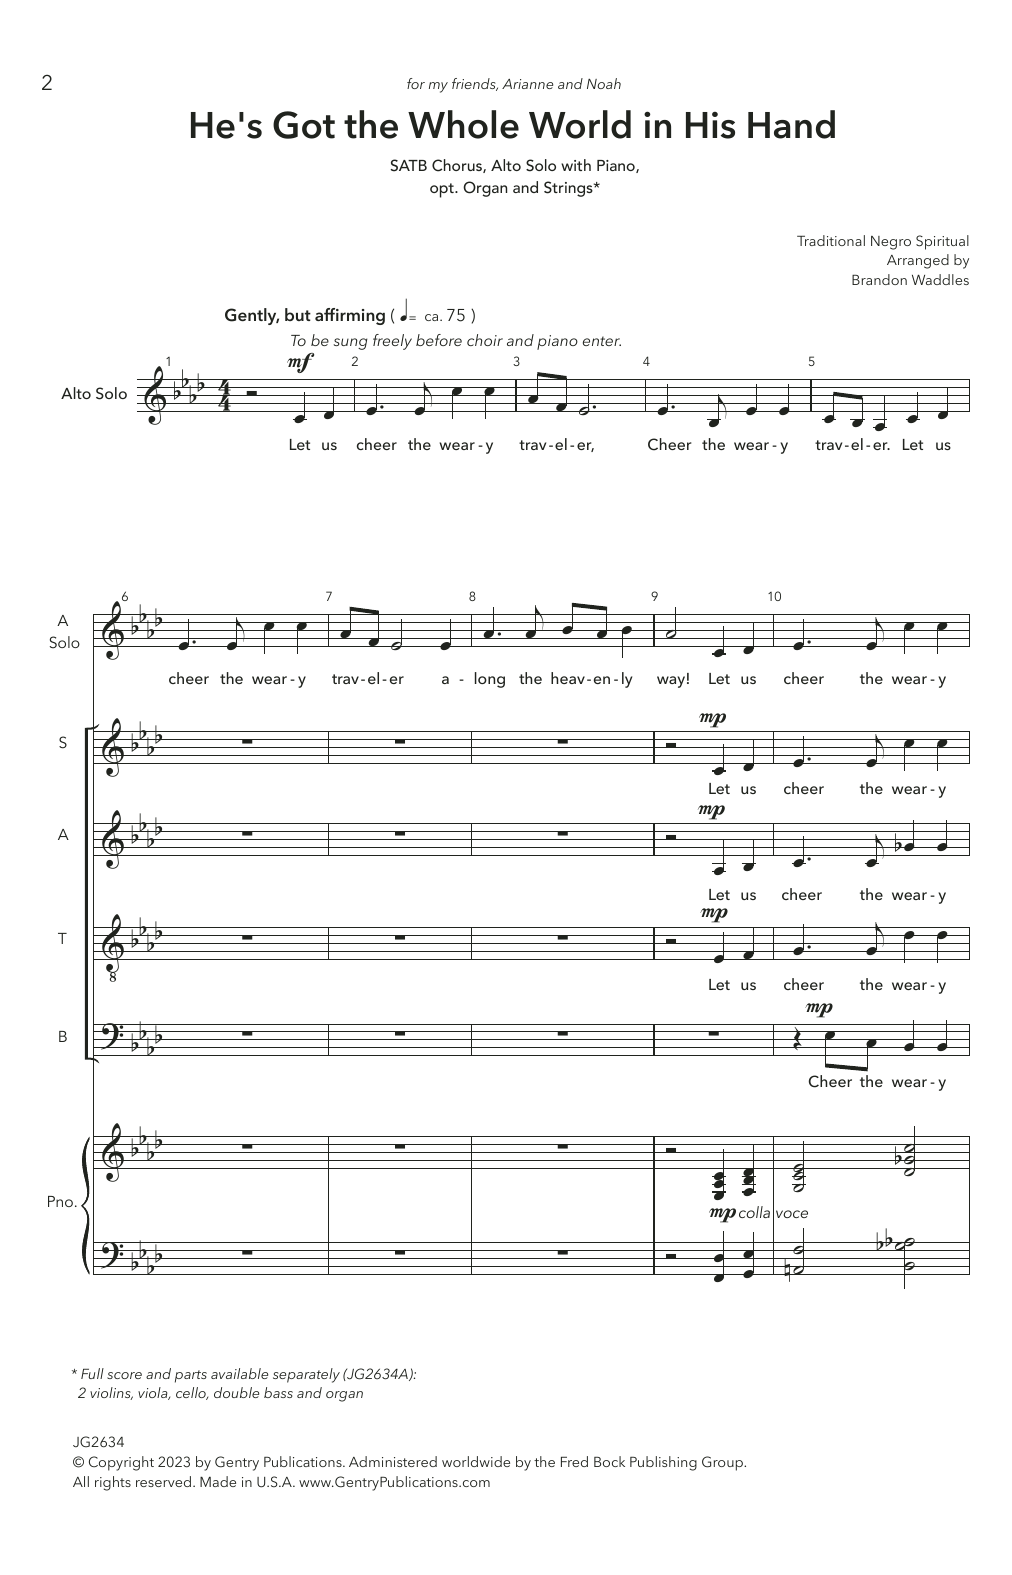 Download Traditional Negro Spiritual He's Got The Whole World In His Hands ( Sheet Music